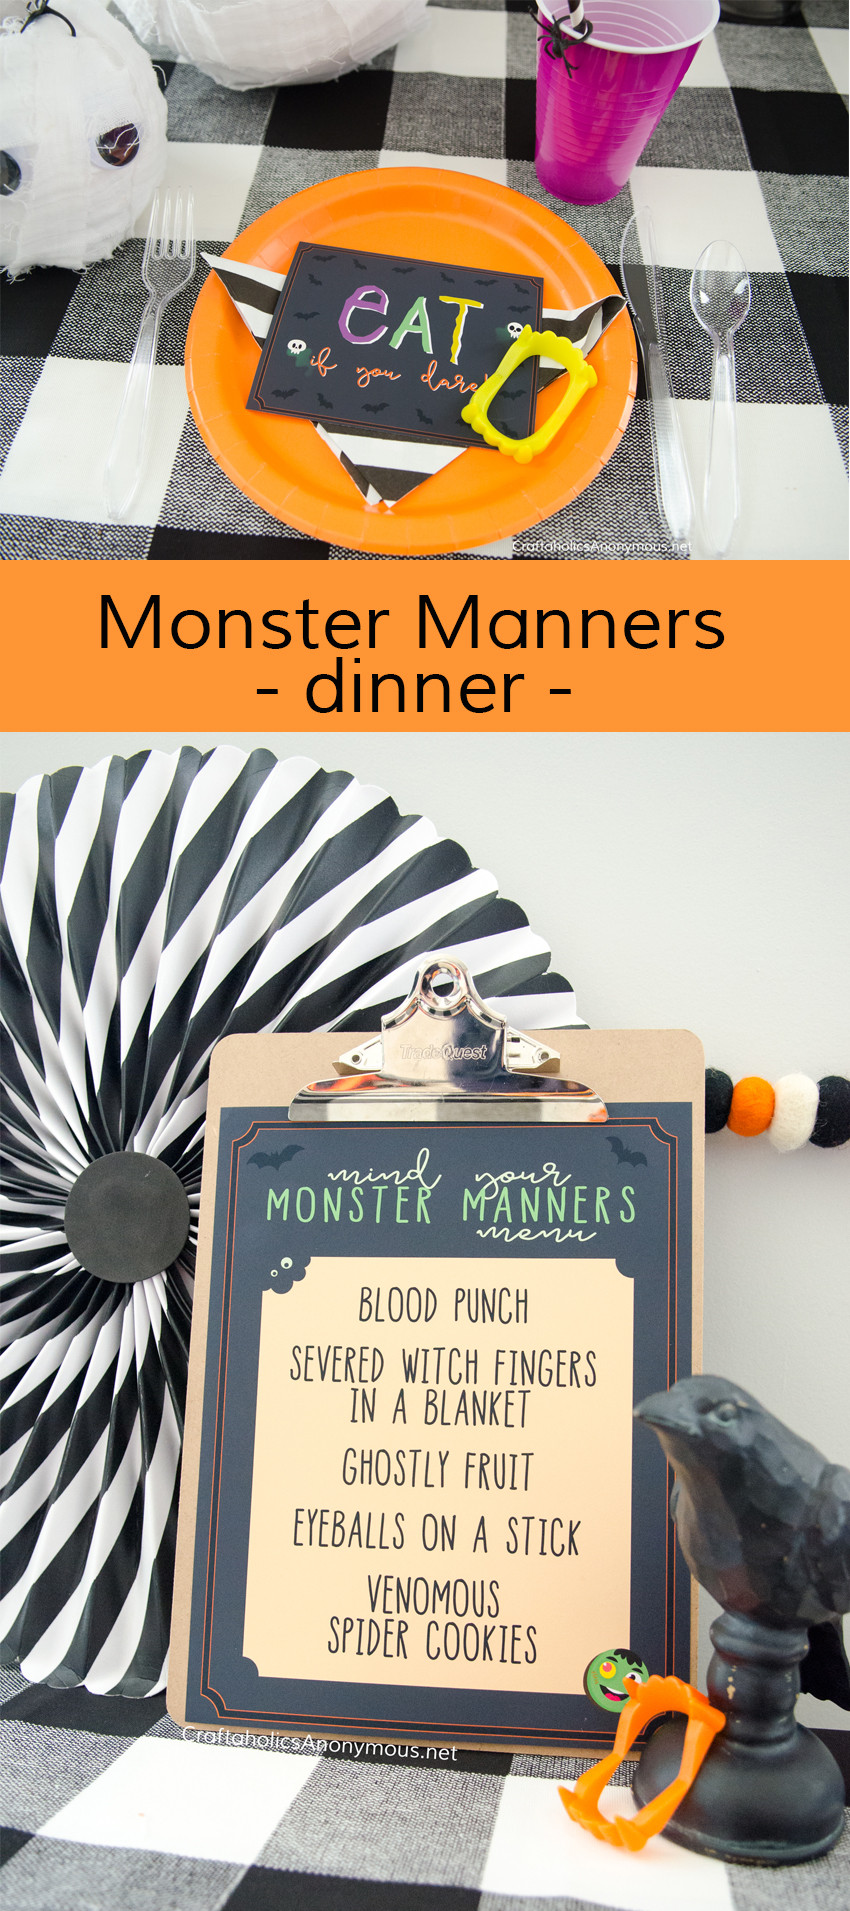 Halloween Monster Manners Dinner :: Great for Activity Days, youth, young women, fun halloween party idea! kids wear their costume to the dinner.